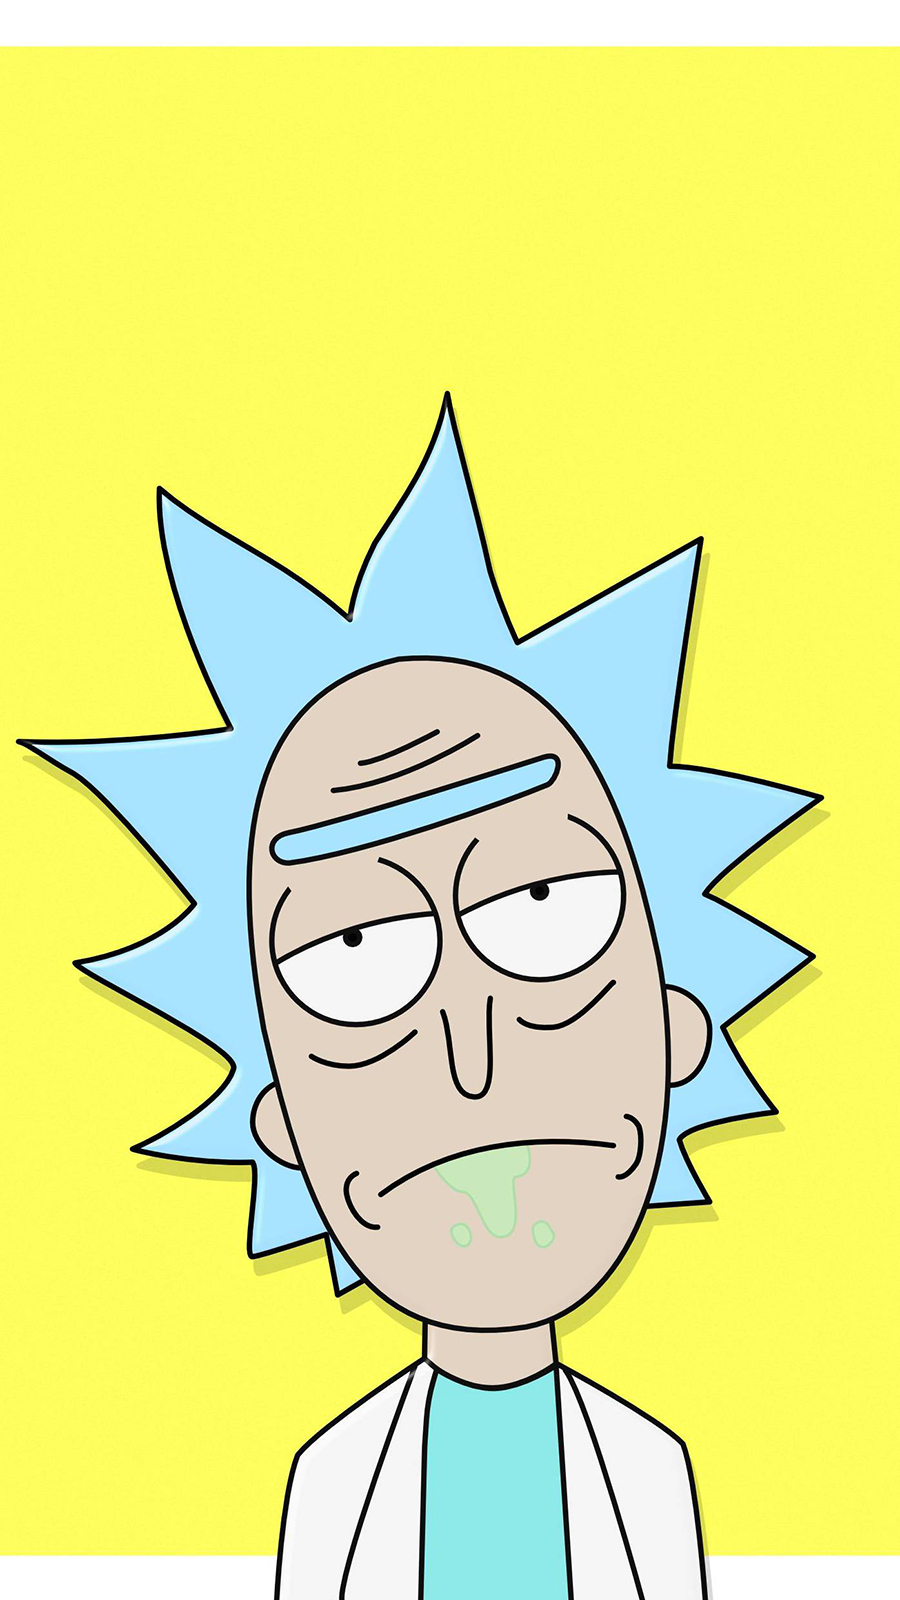 Sad Rick Wallpapers Now Download For Your Device